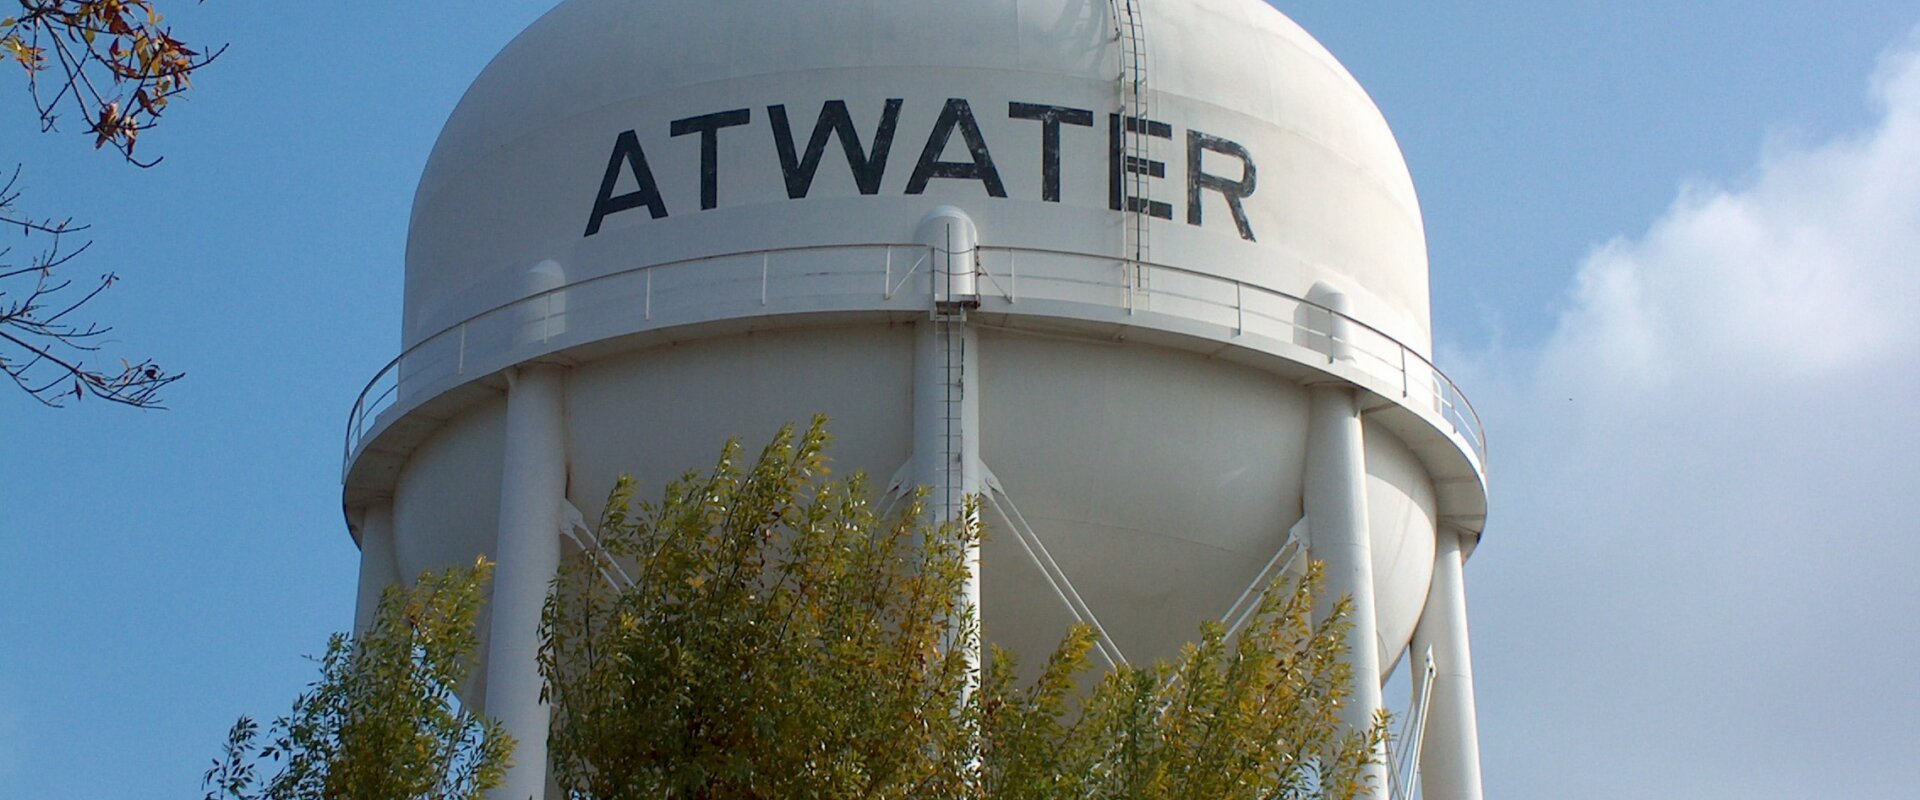 Atwater City Water tower in California